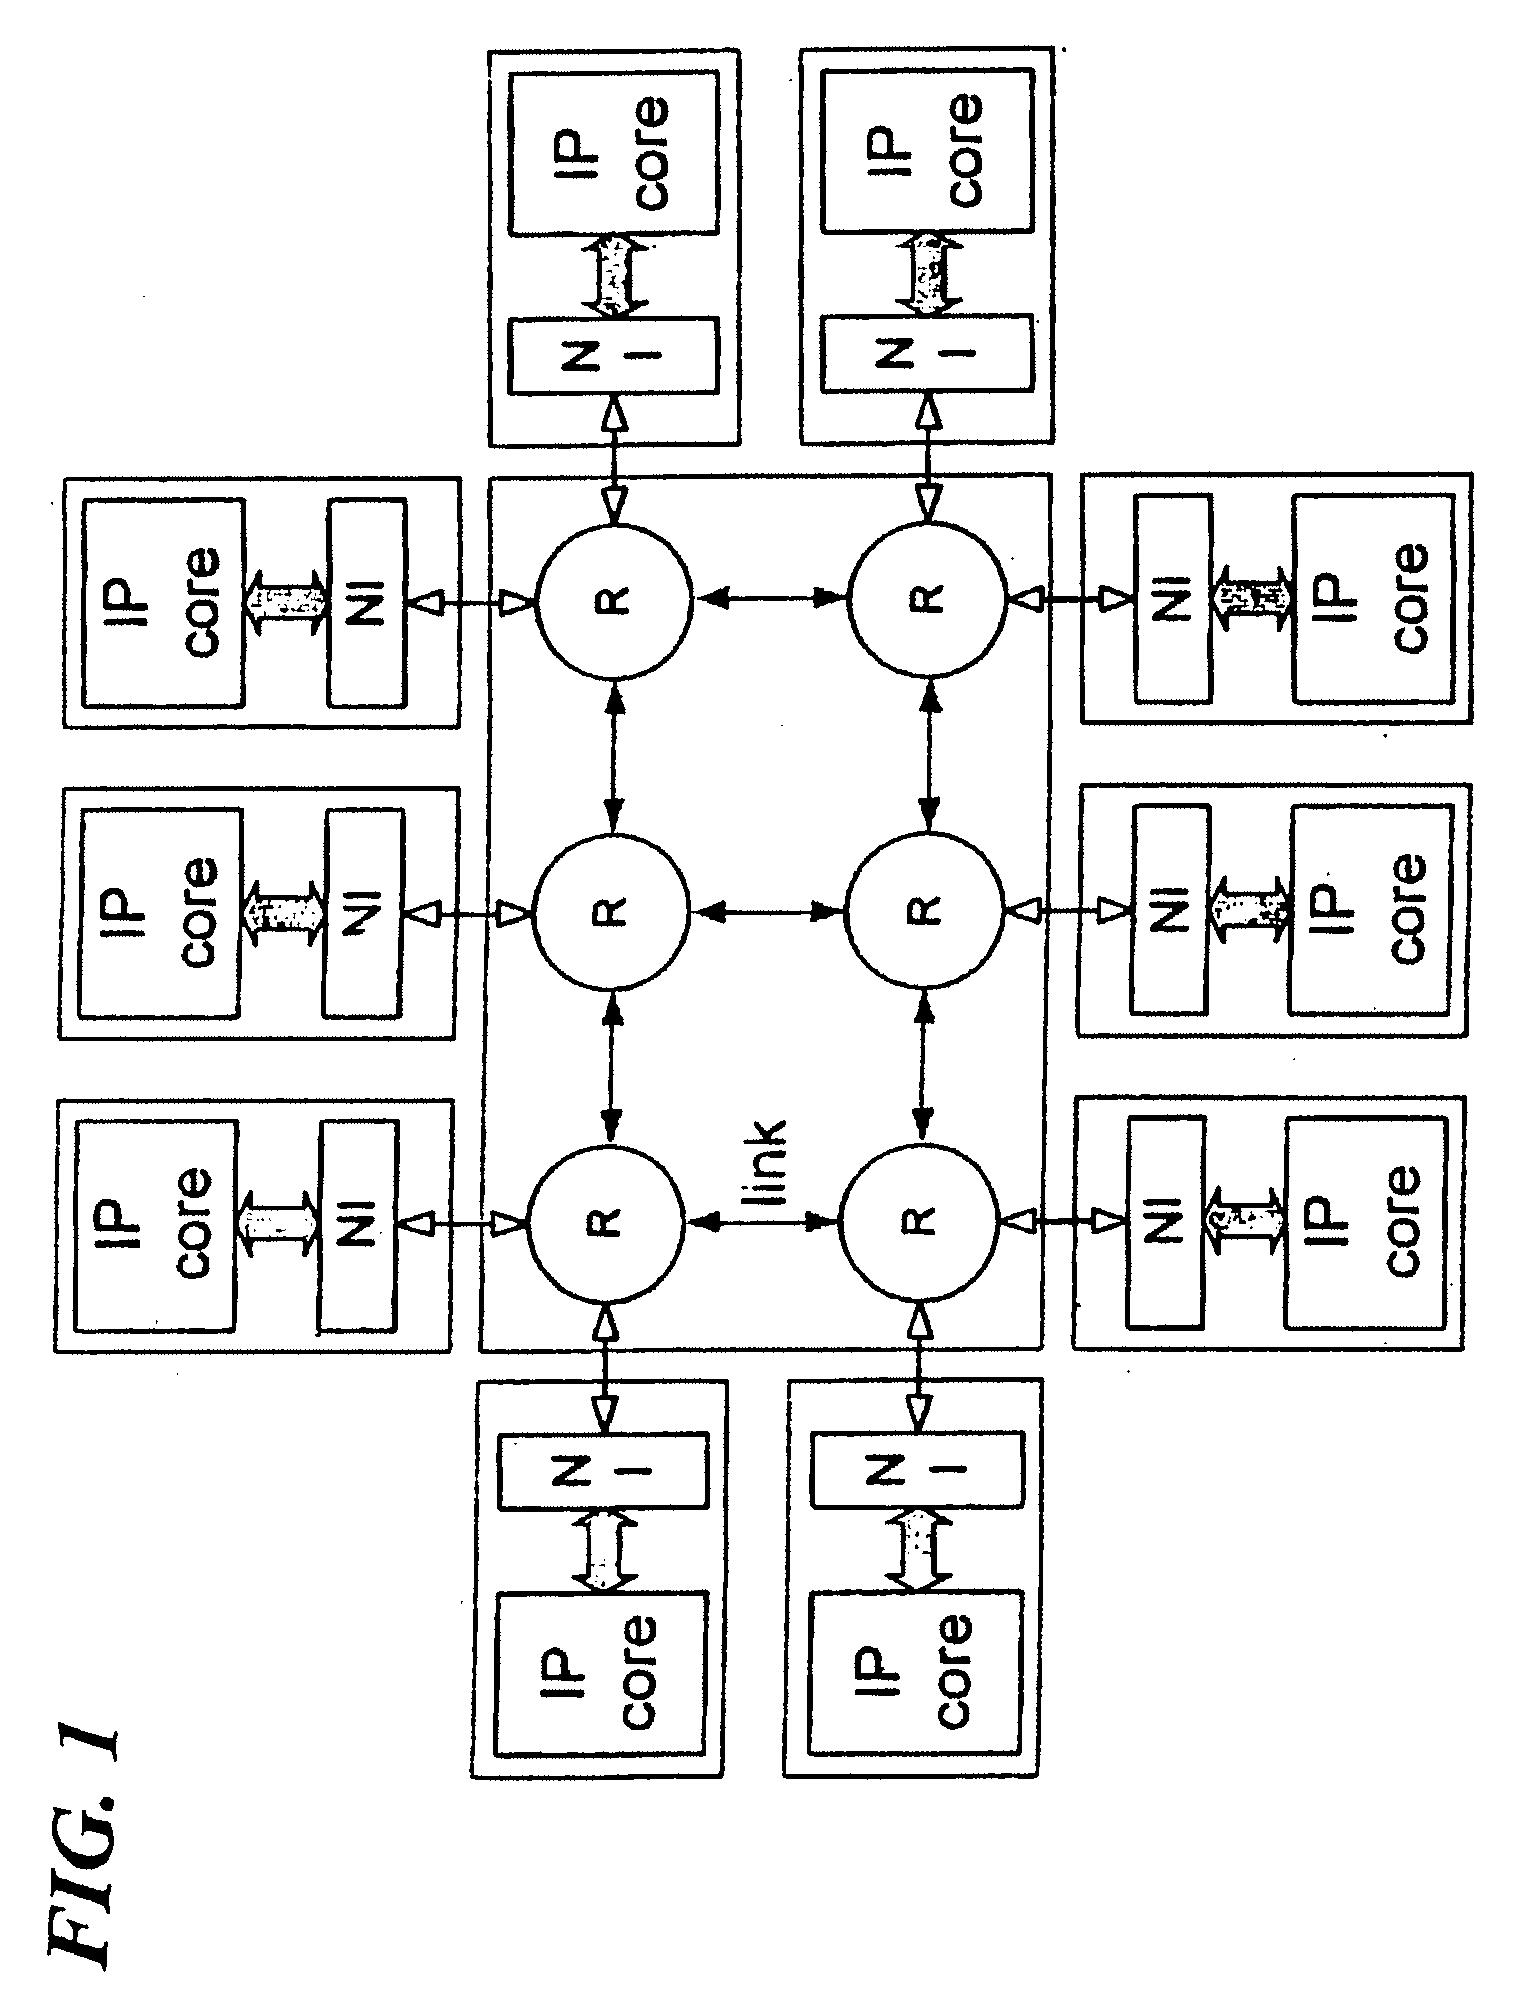 Method and system for full-duplex mesochronous communications and corresponding computer program product